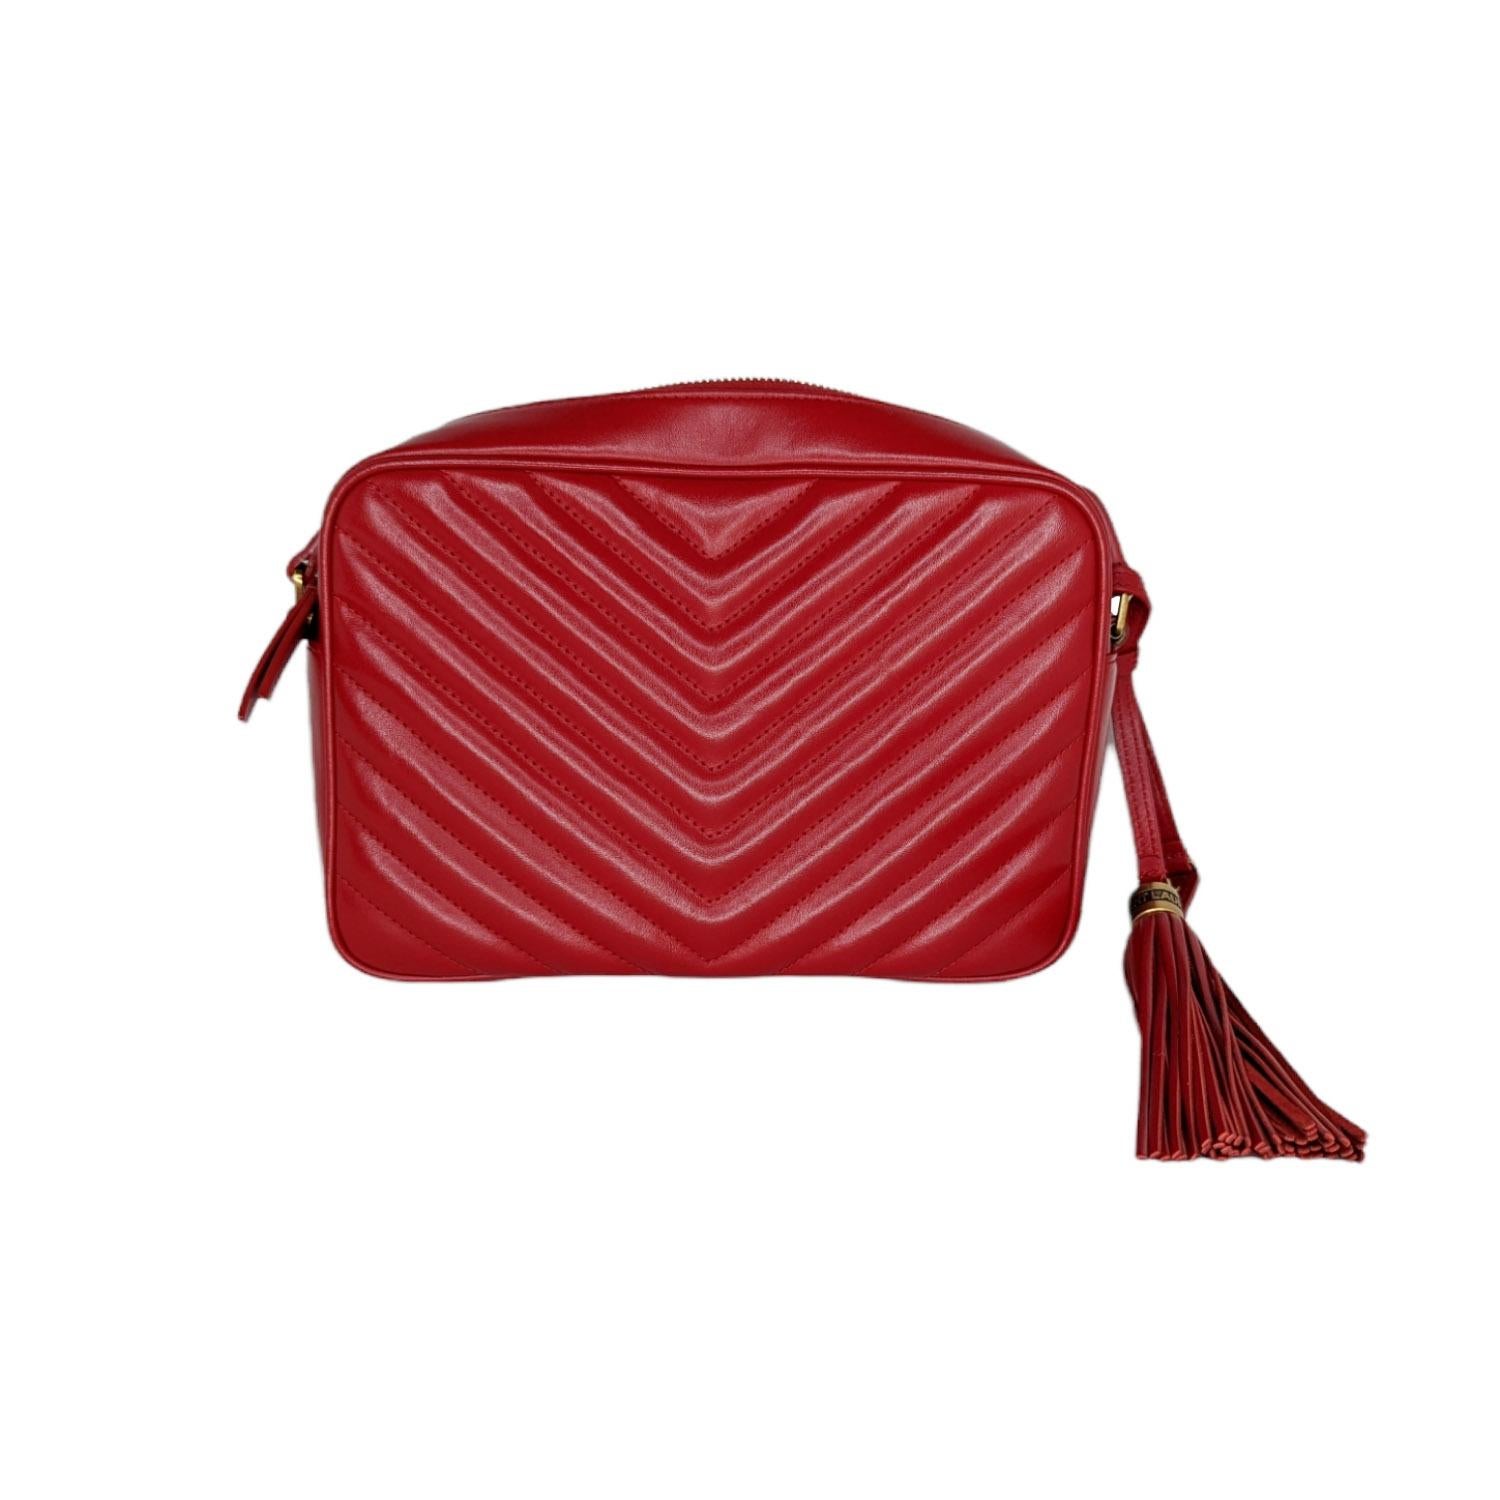 Inspired by vintage camera bags, this chic crossbody features elegant matelassé stitching, tonal logo-monogram hardware and a dramatic tassel at one side. Made in Italy. Retail price $1,450.

French designer Yves Saint Laurent revolutionized the